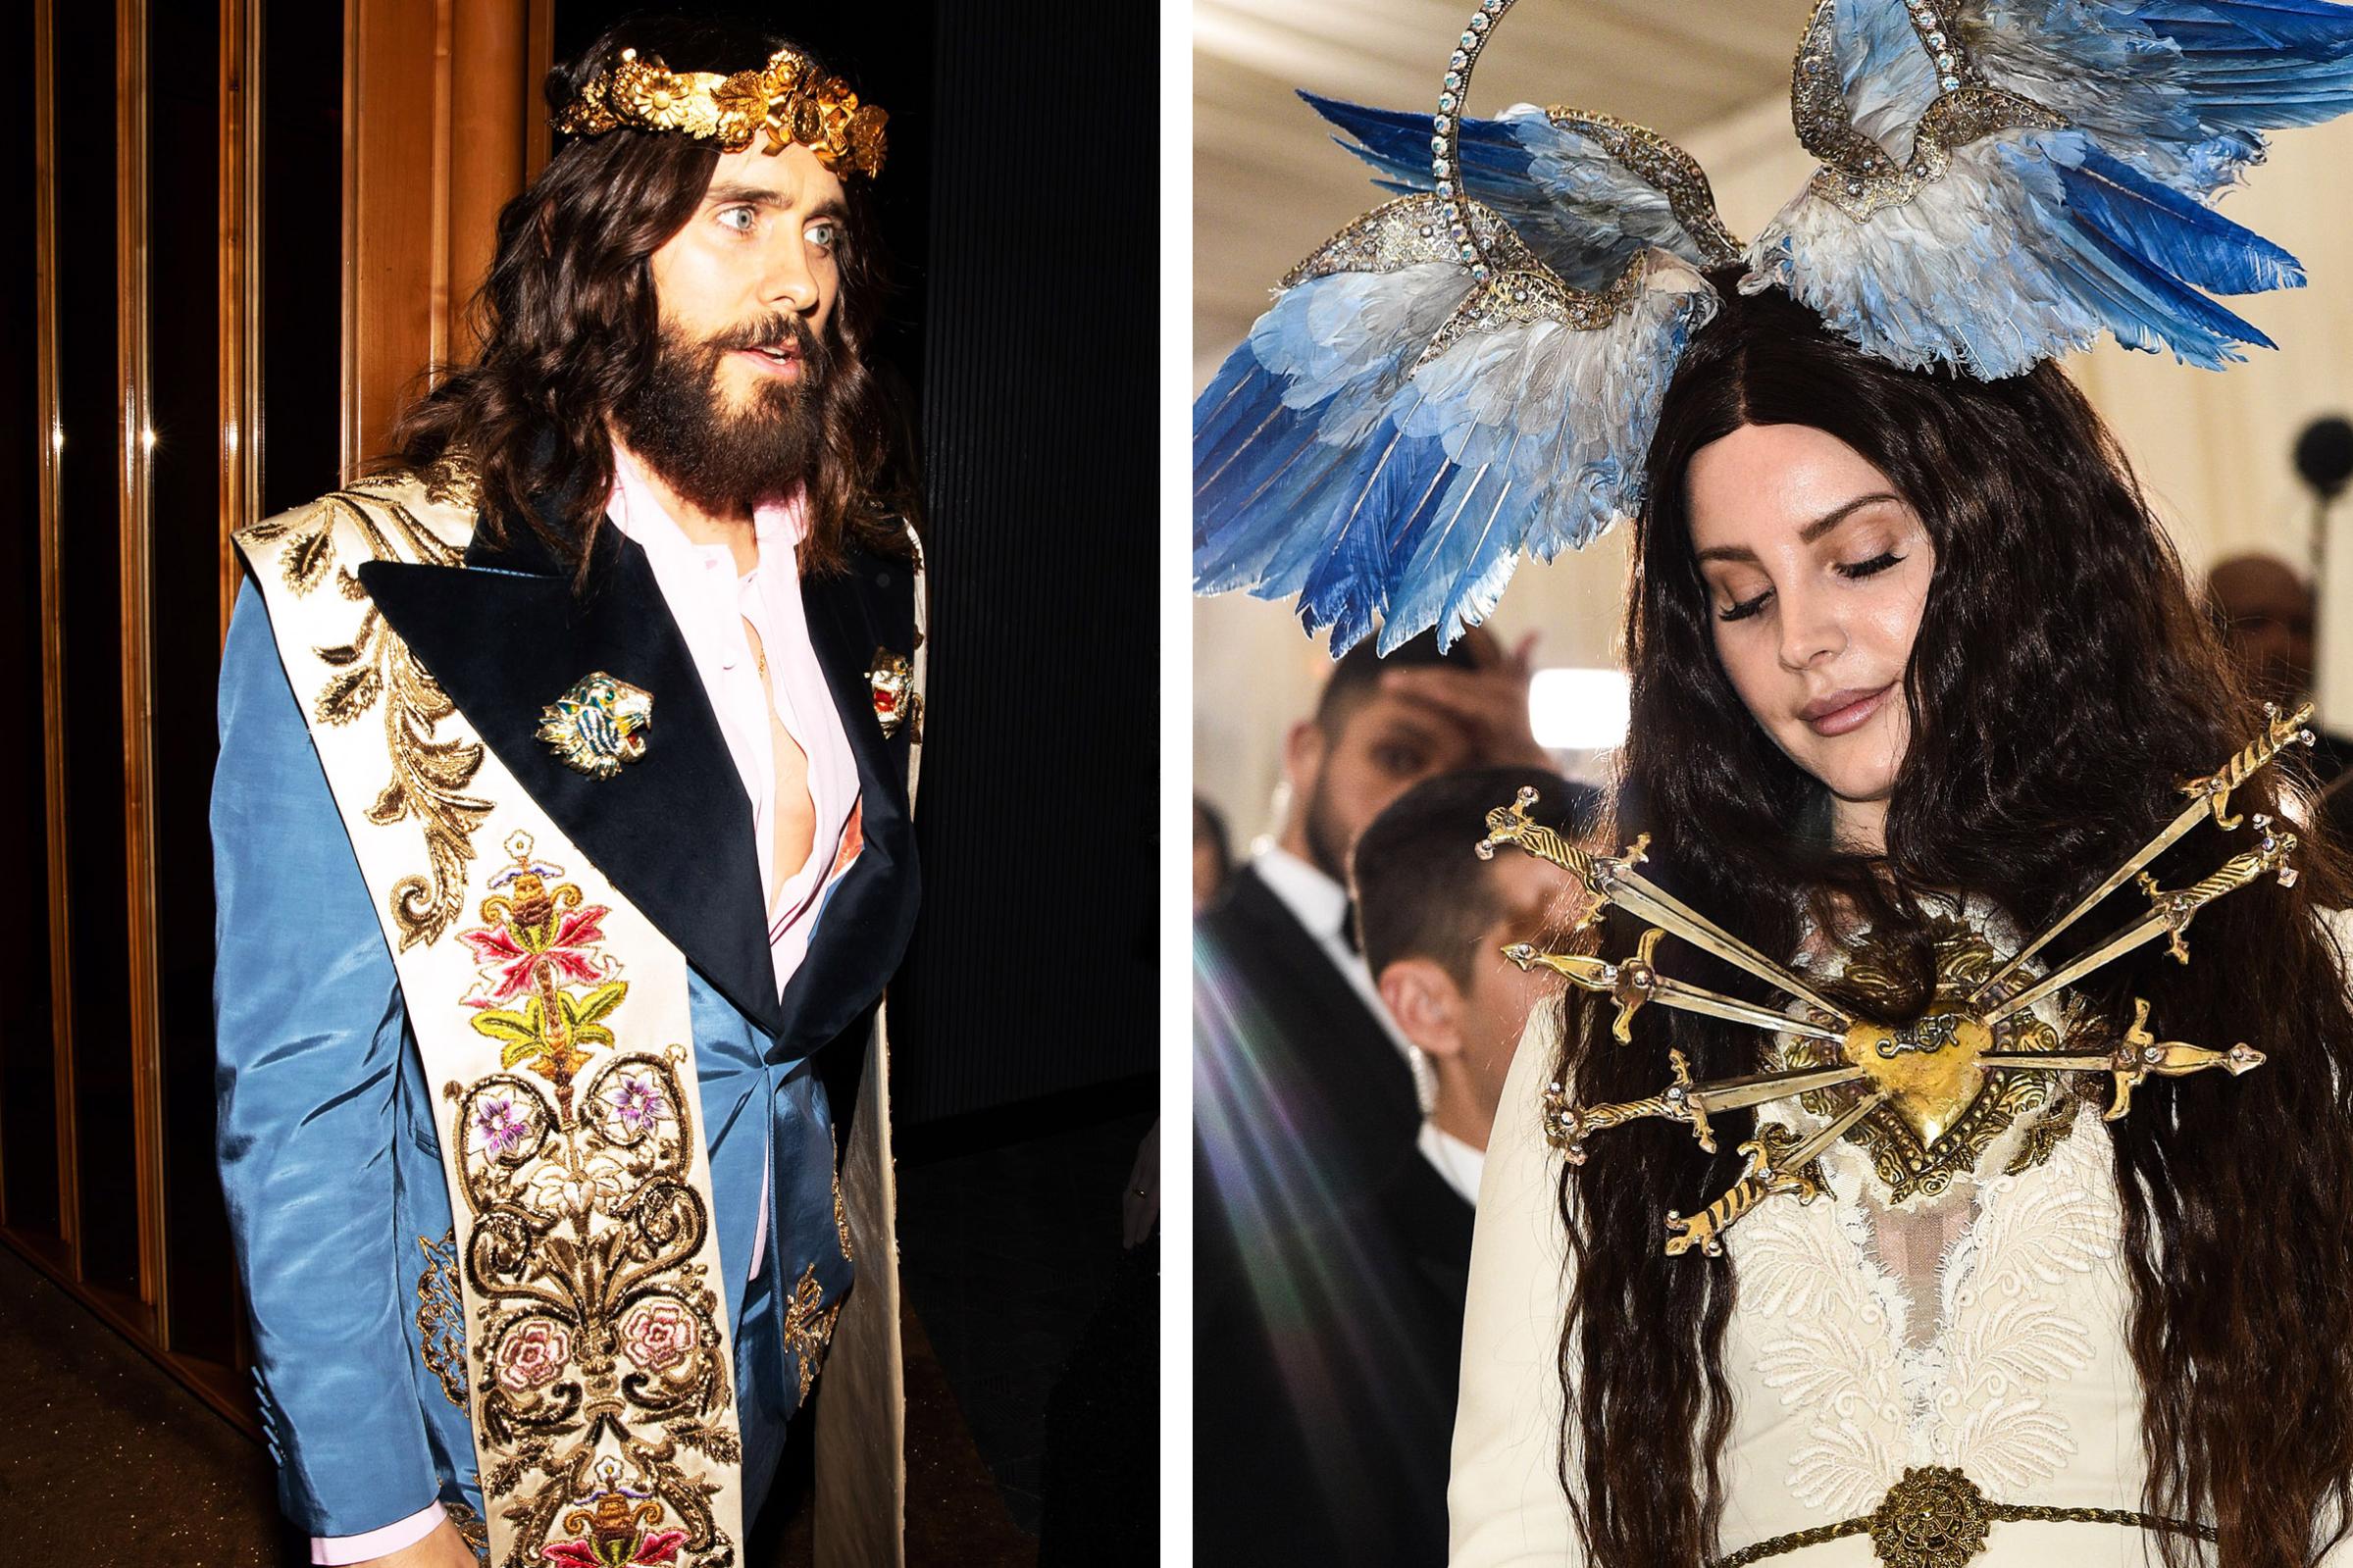 Jared Leto and Lana Del Rey attend the 2018 Met Gala